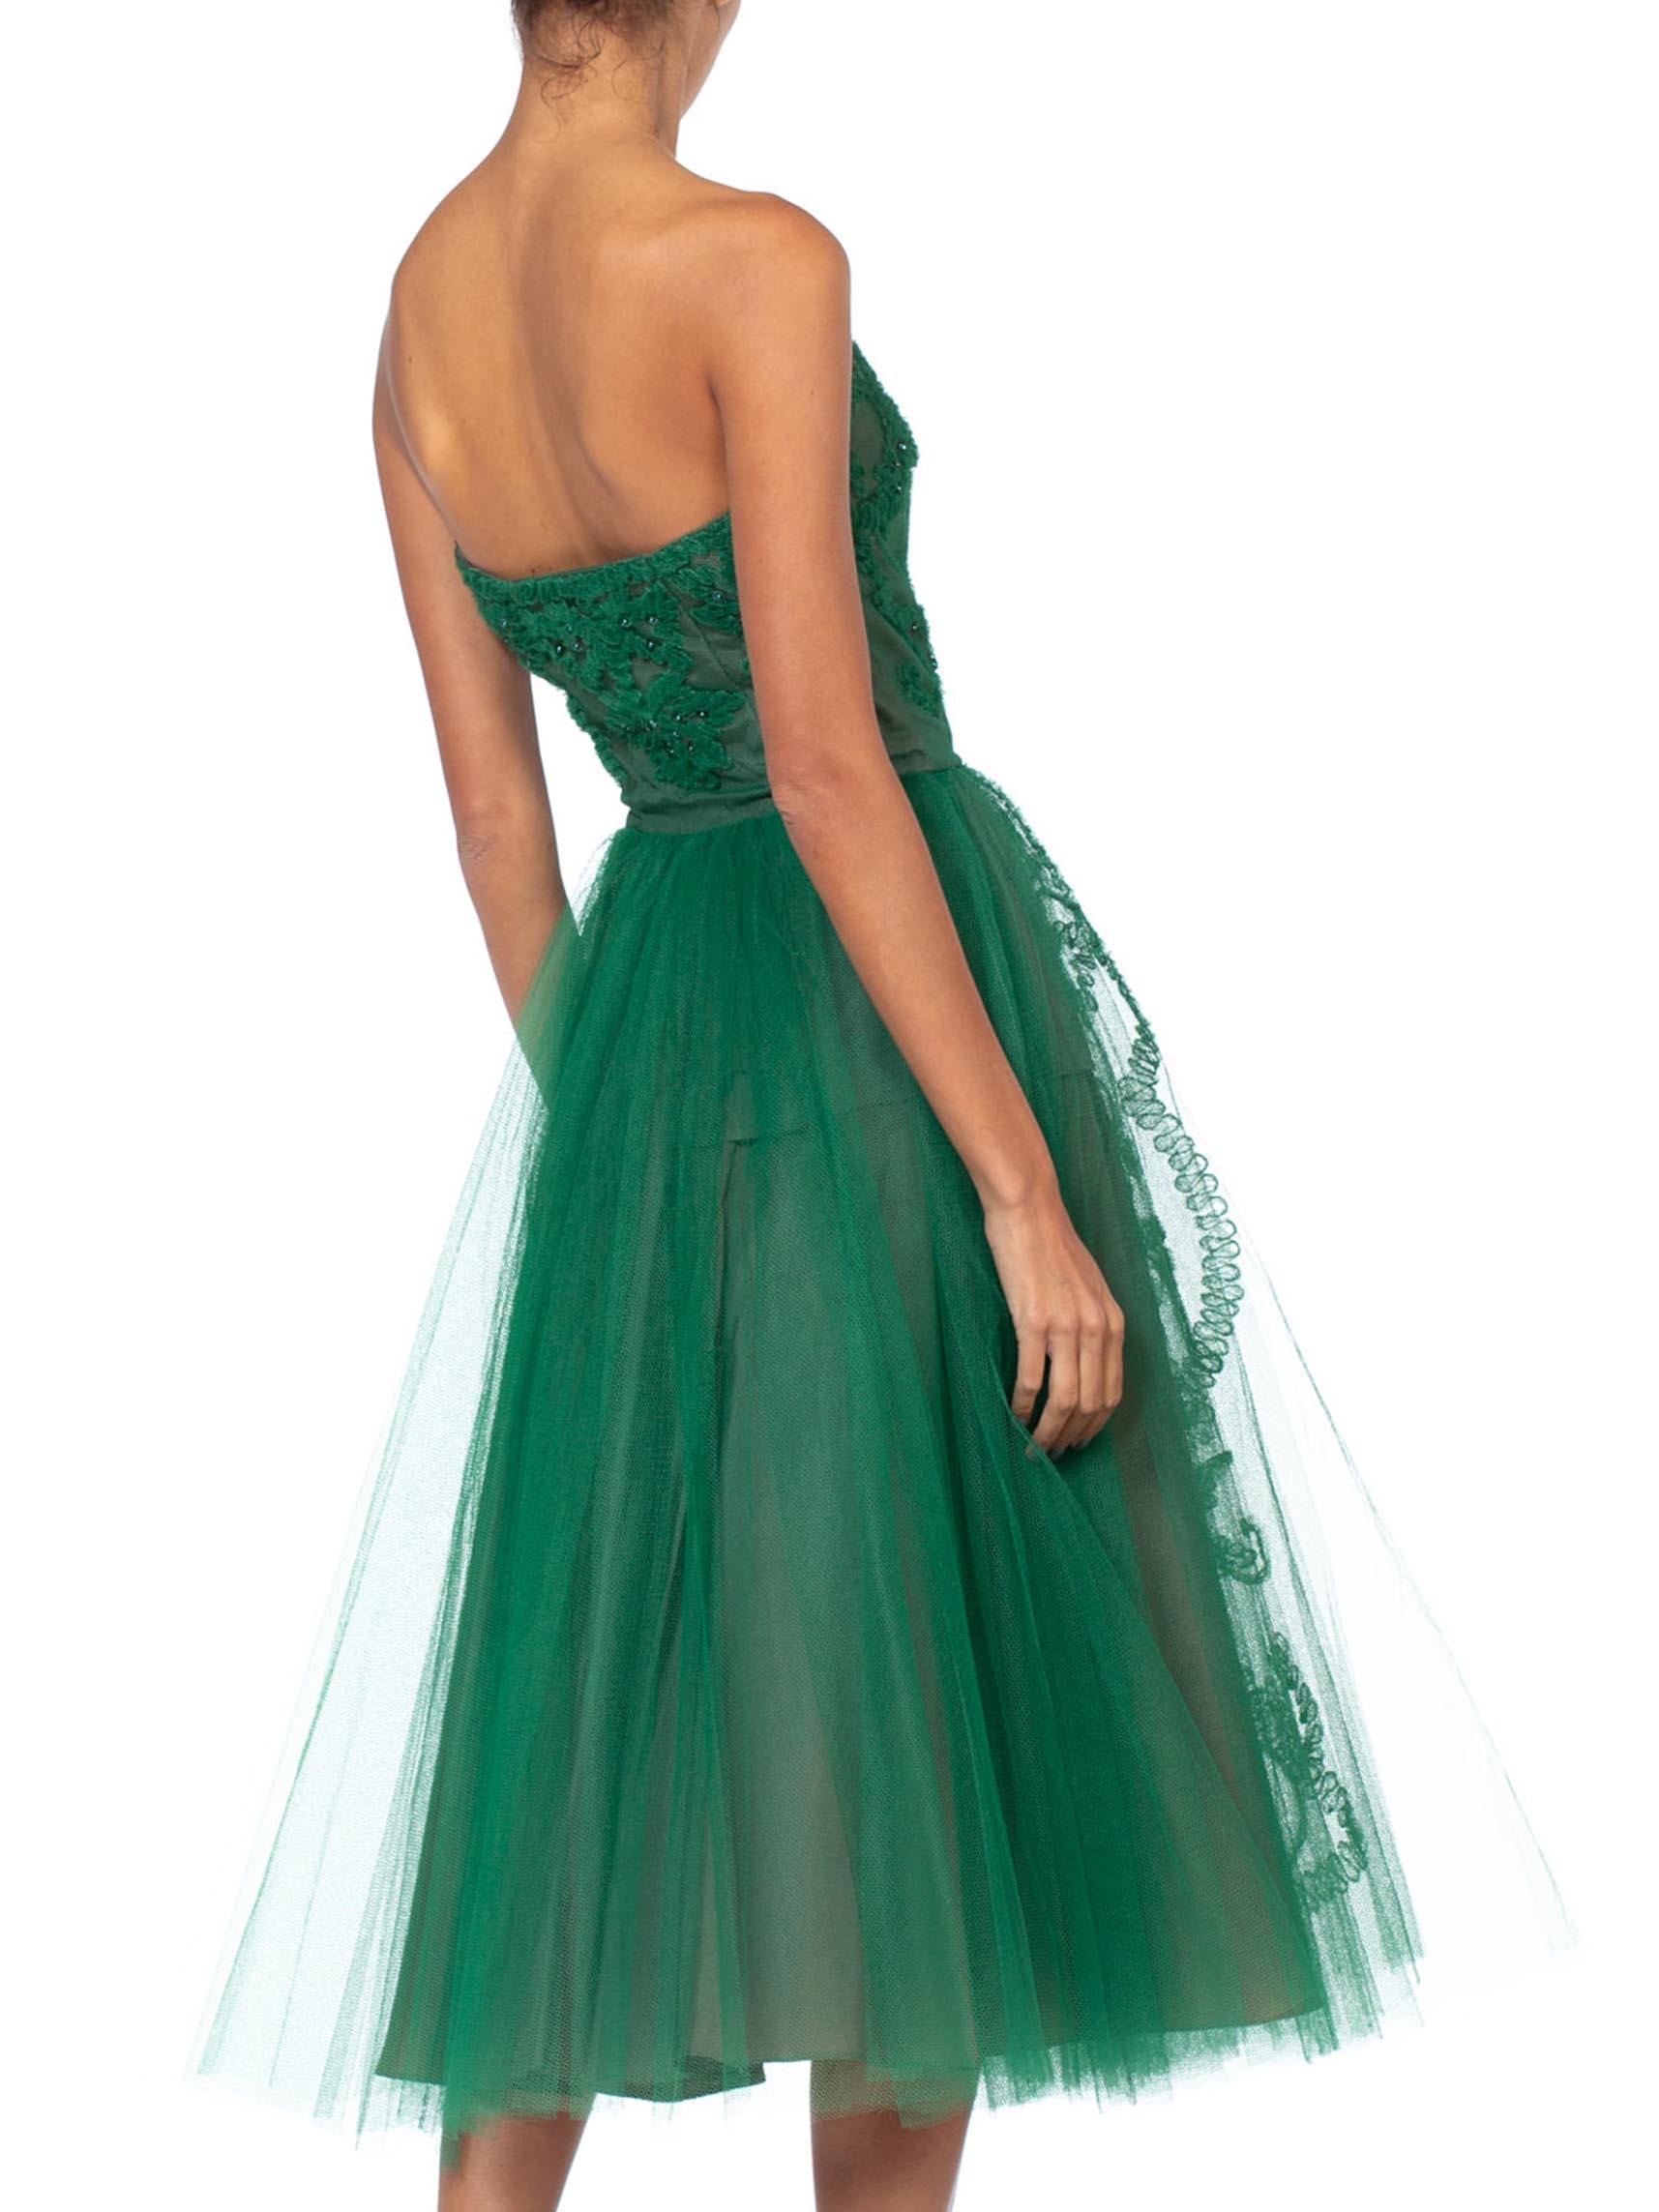 1950S Emerald Green Nylon Tulle Strapless Party Dress Appliquéd & Beaded With M For Sale 1